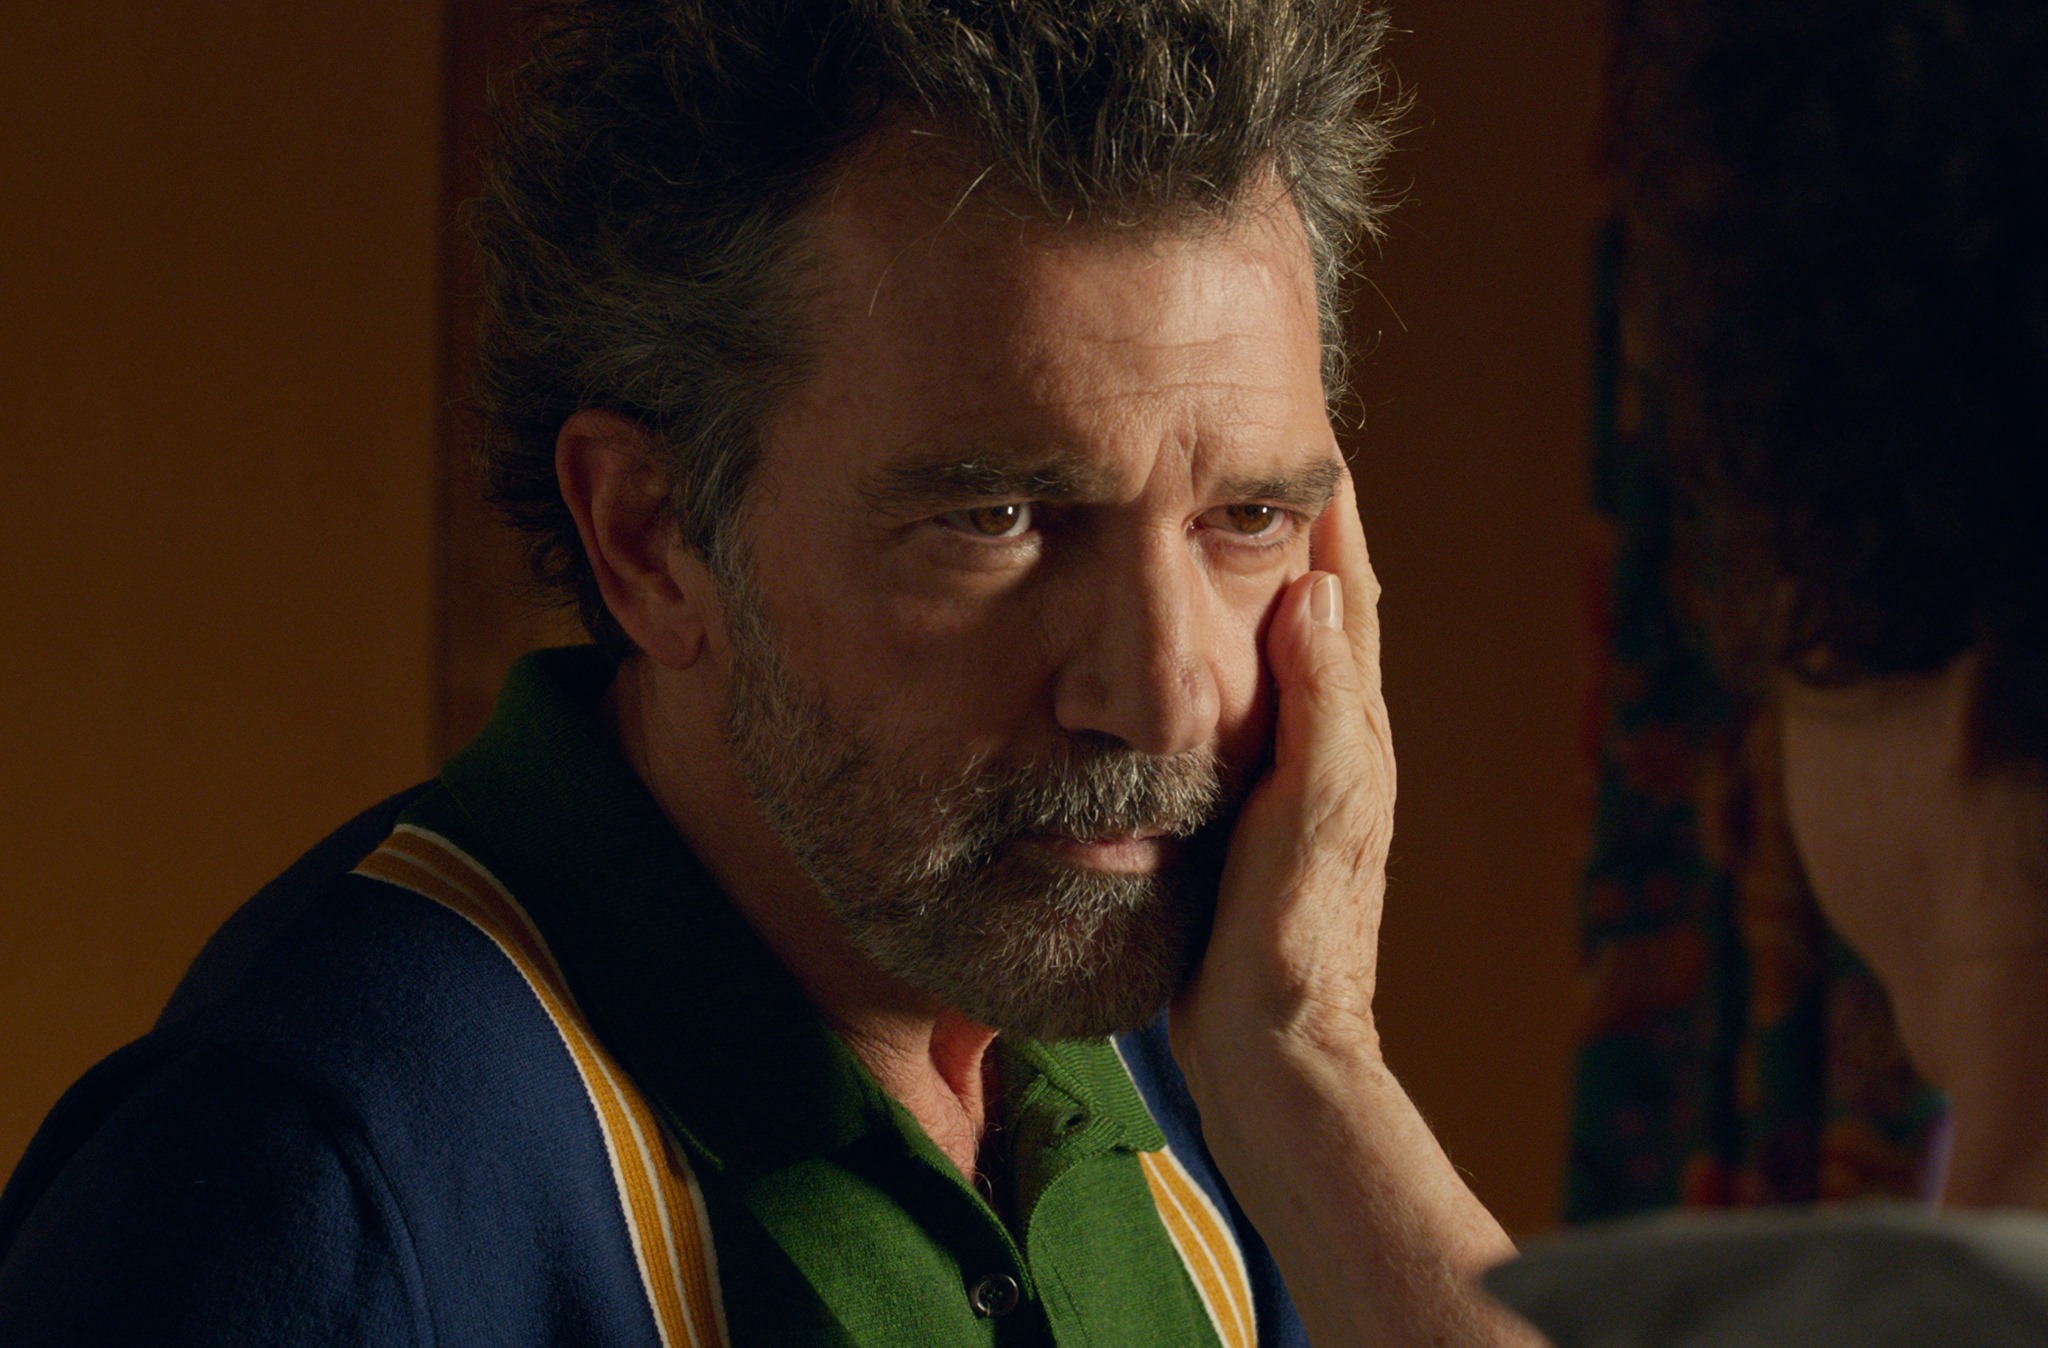 Exclusive Clip: Director Pedro Almodovar on Musical Influences for Pain and Glory